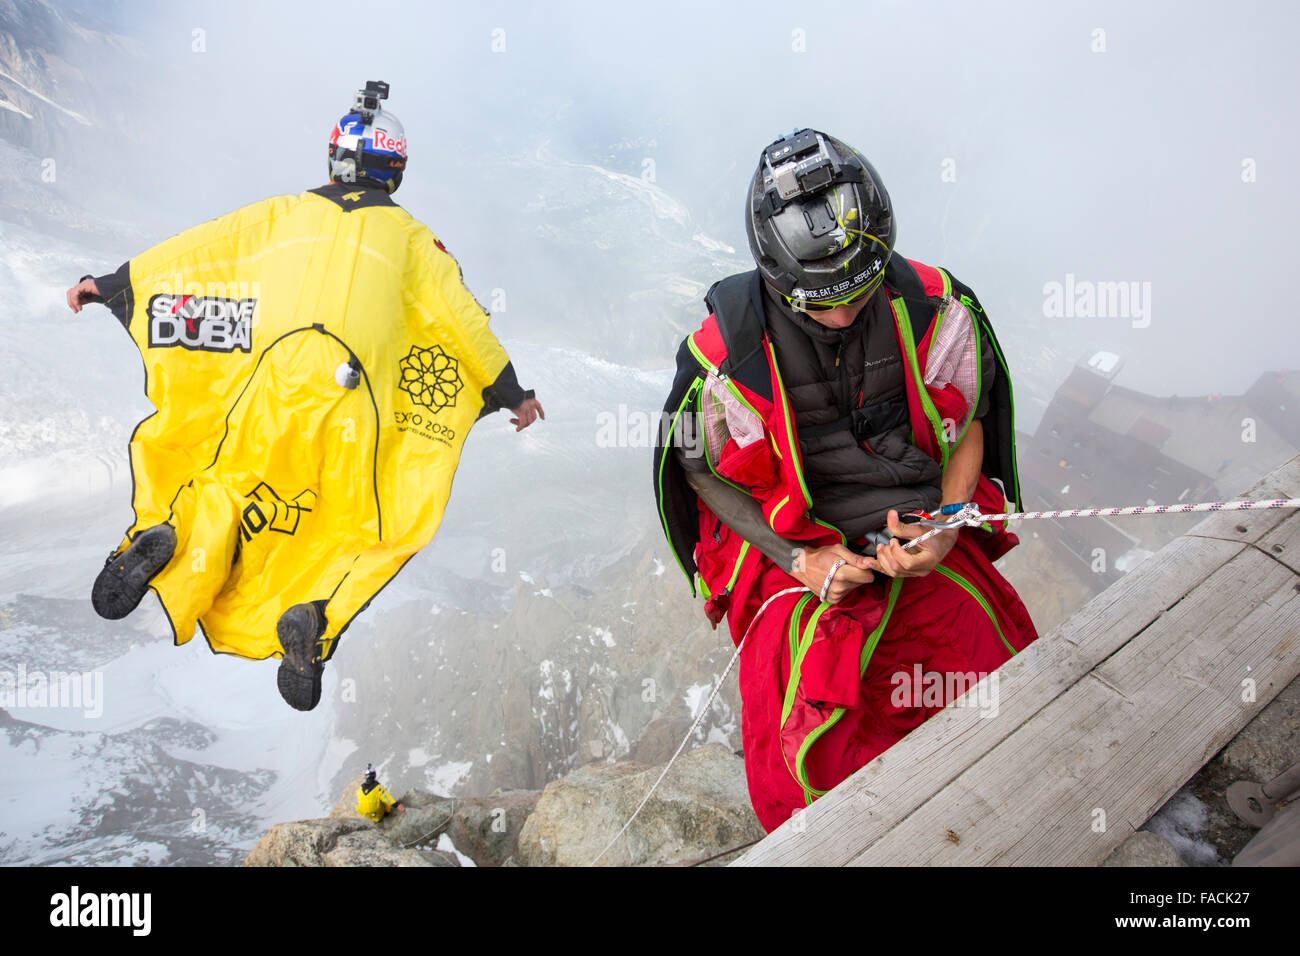 Base jumpers wearing wing suites prepare to jump from the Aiguille Du midi above Chamonix, France. Stock Photo